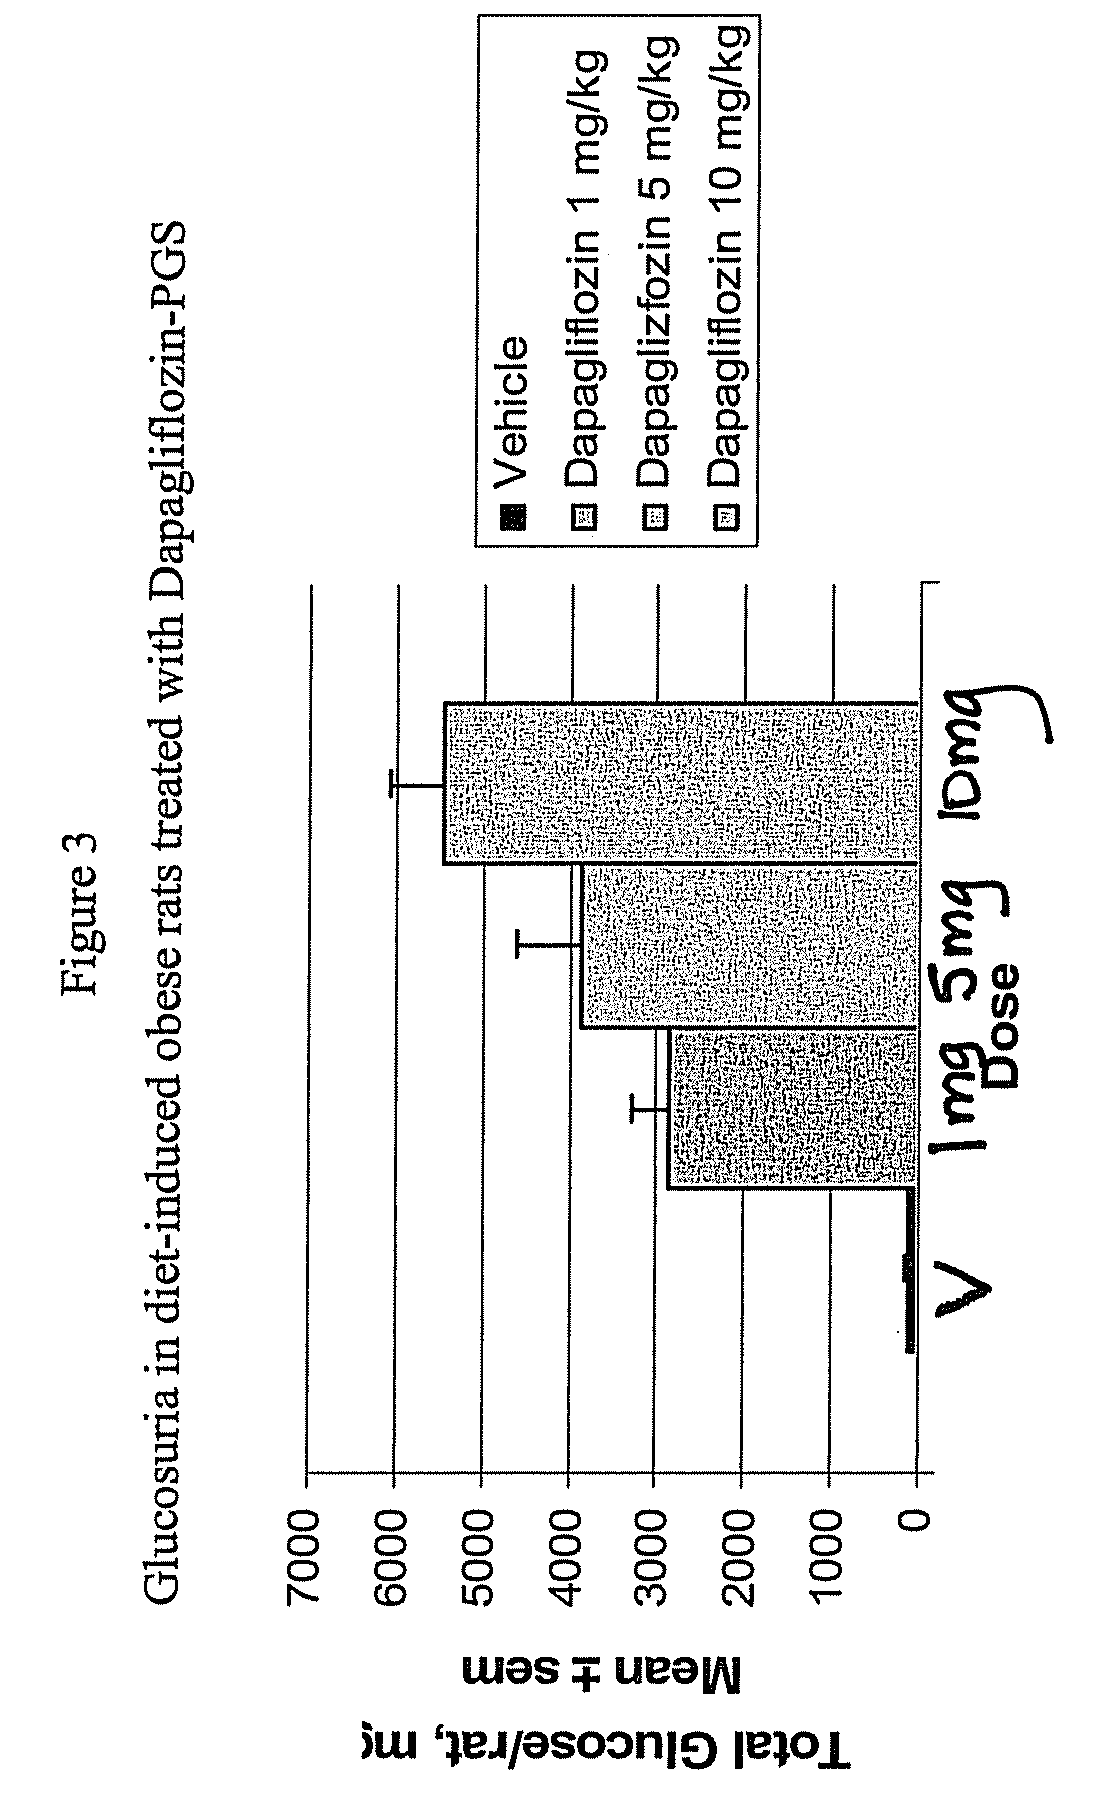 Methods for treating obesity employing an SGLT2 inhibitor